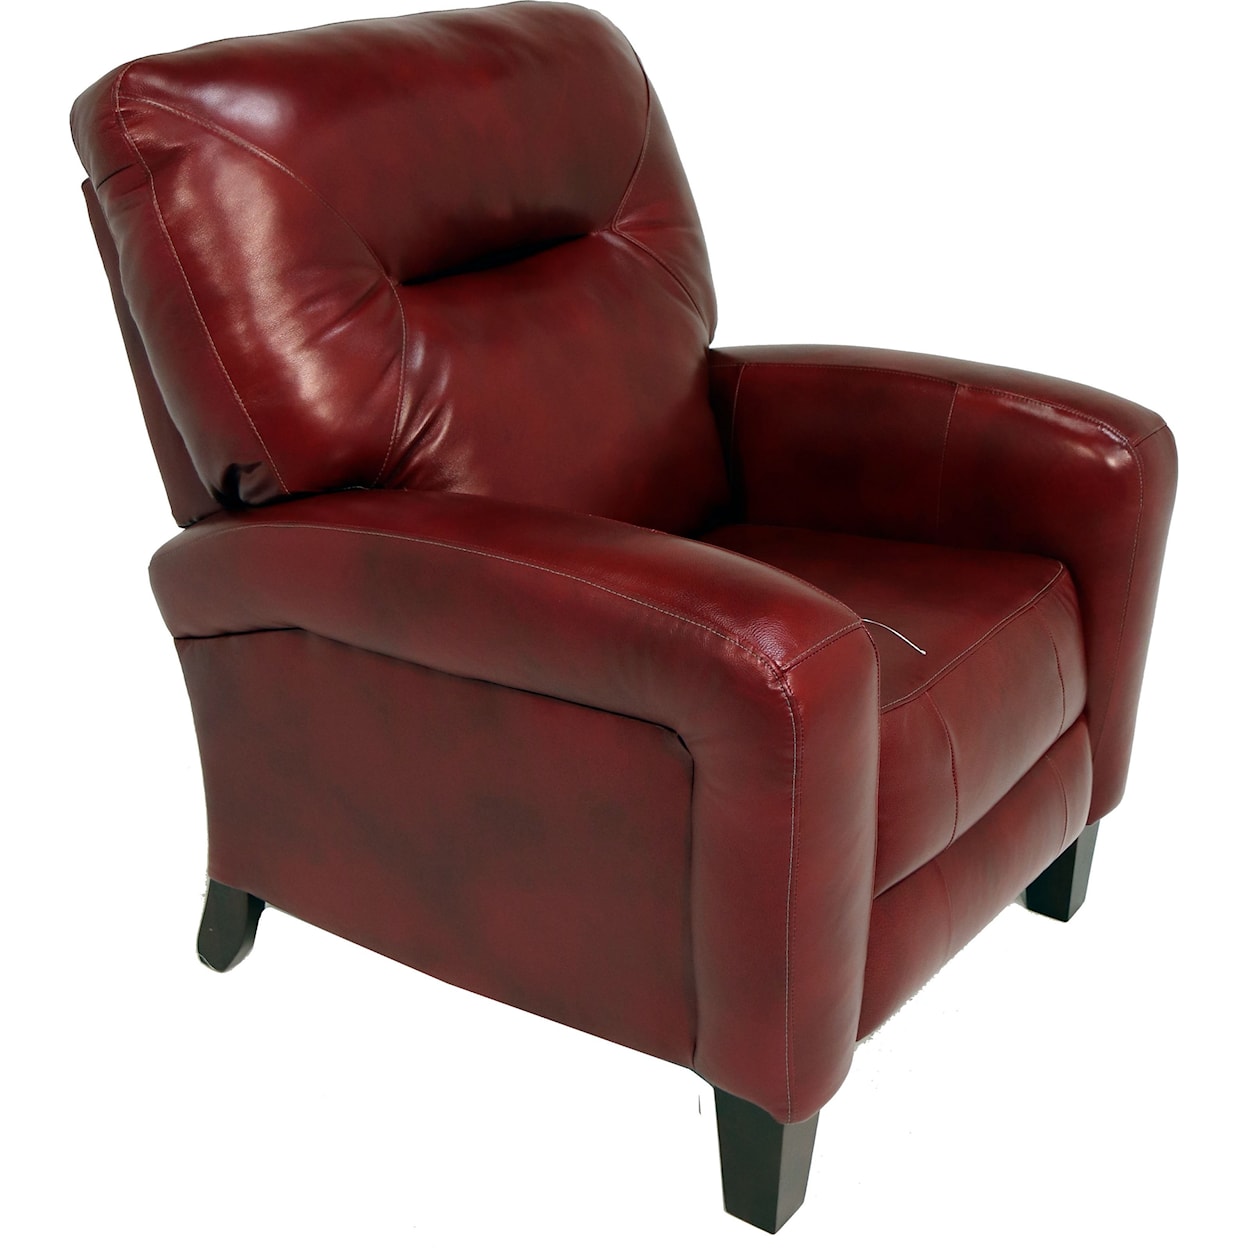 Southern Motion Recliners Soho Recliner